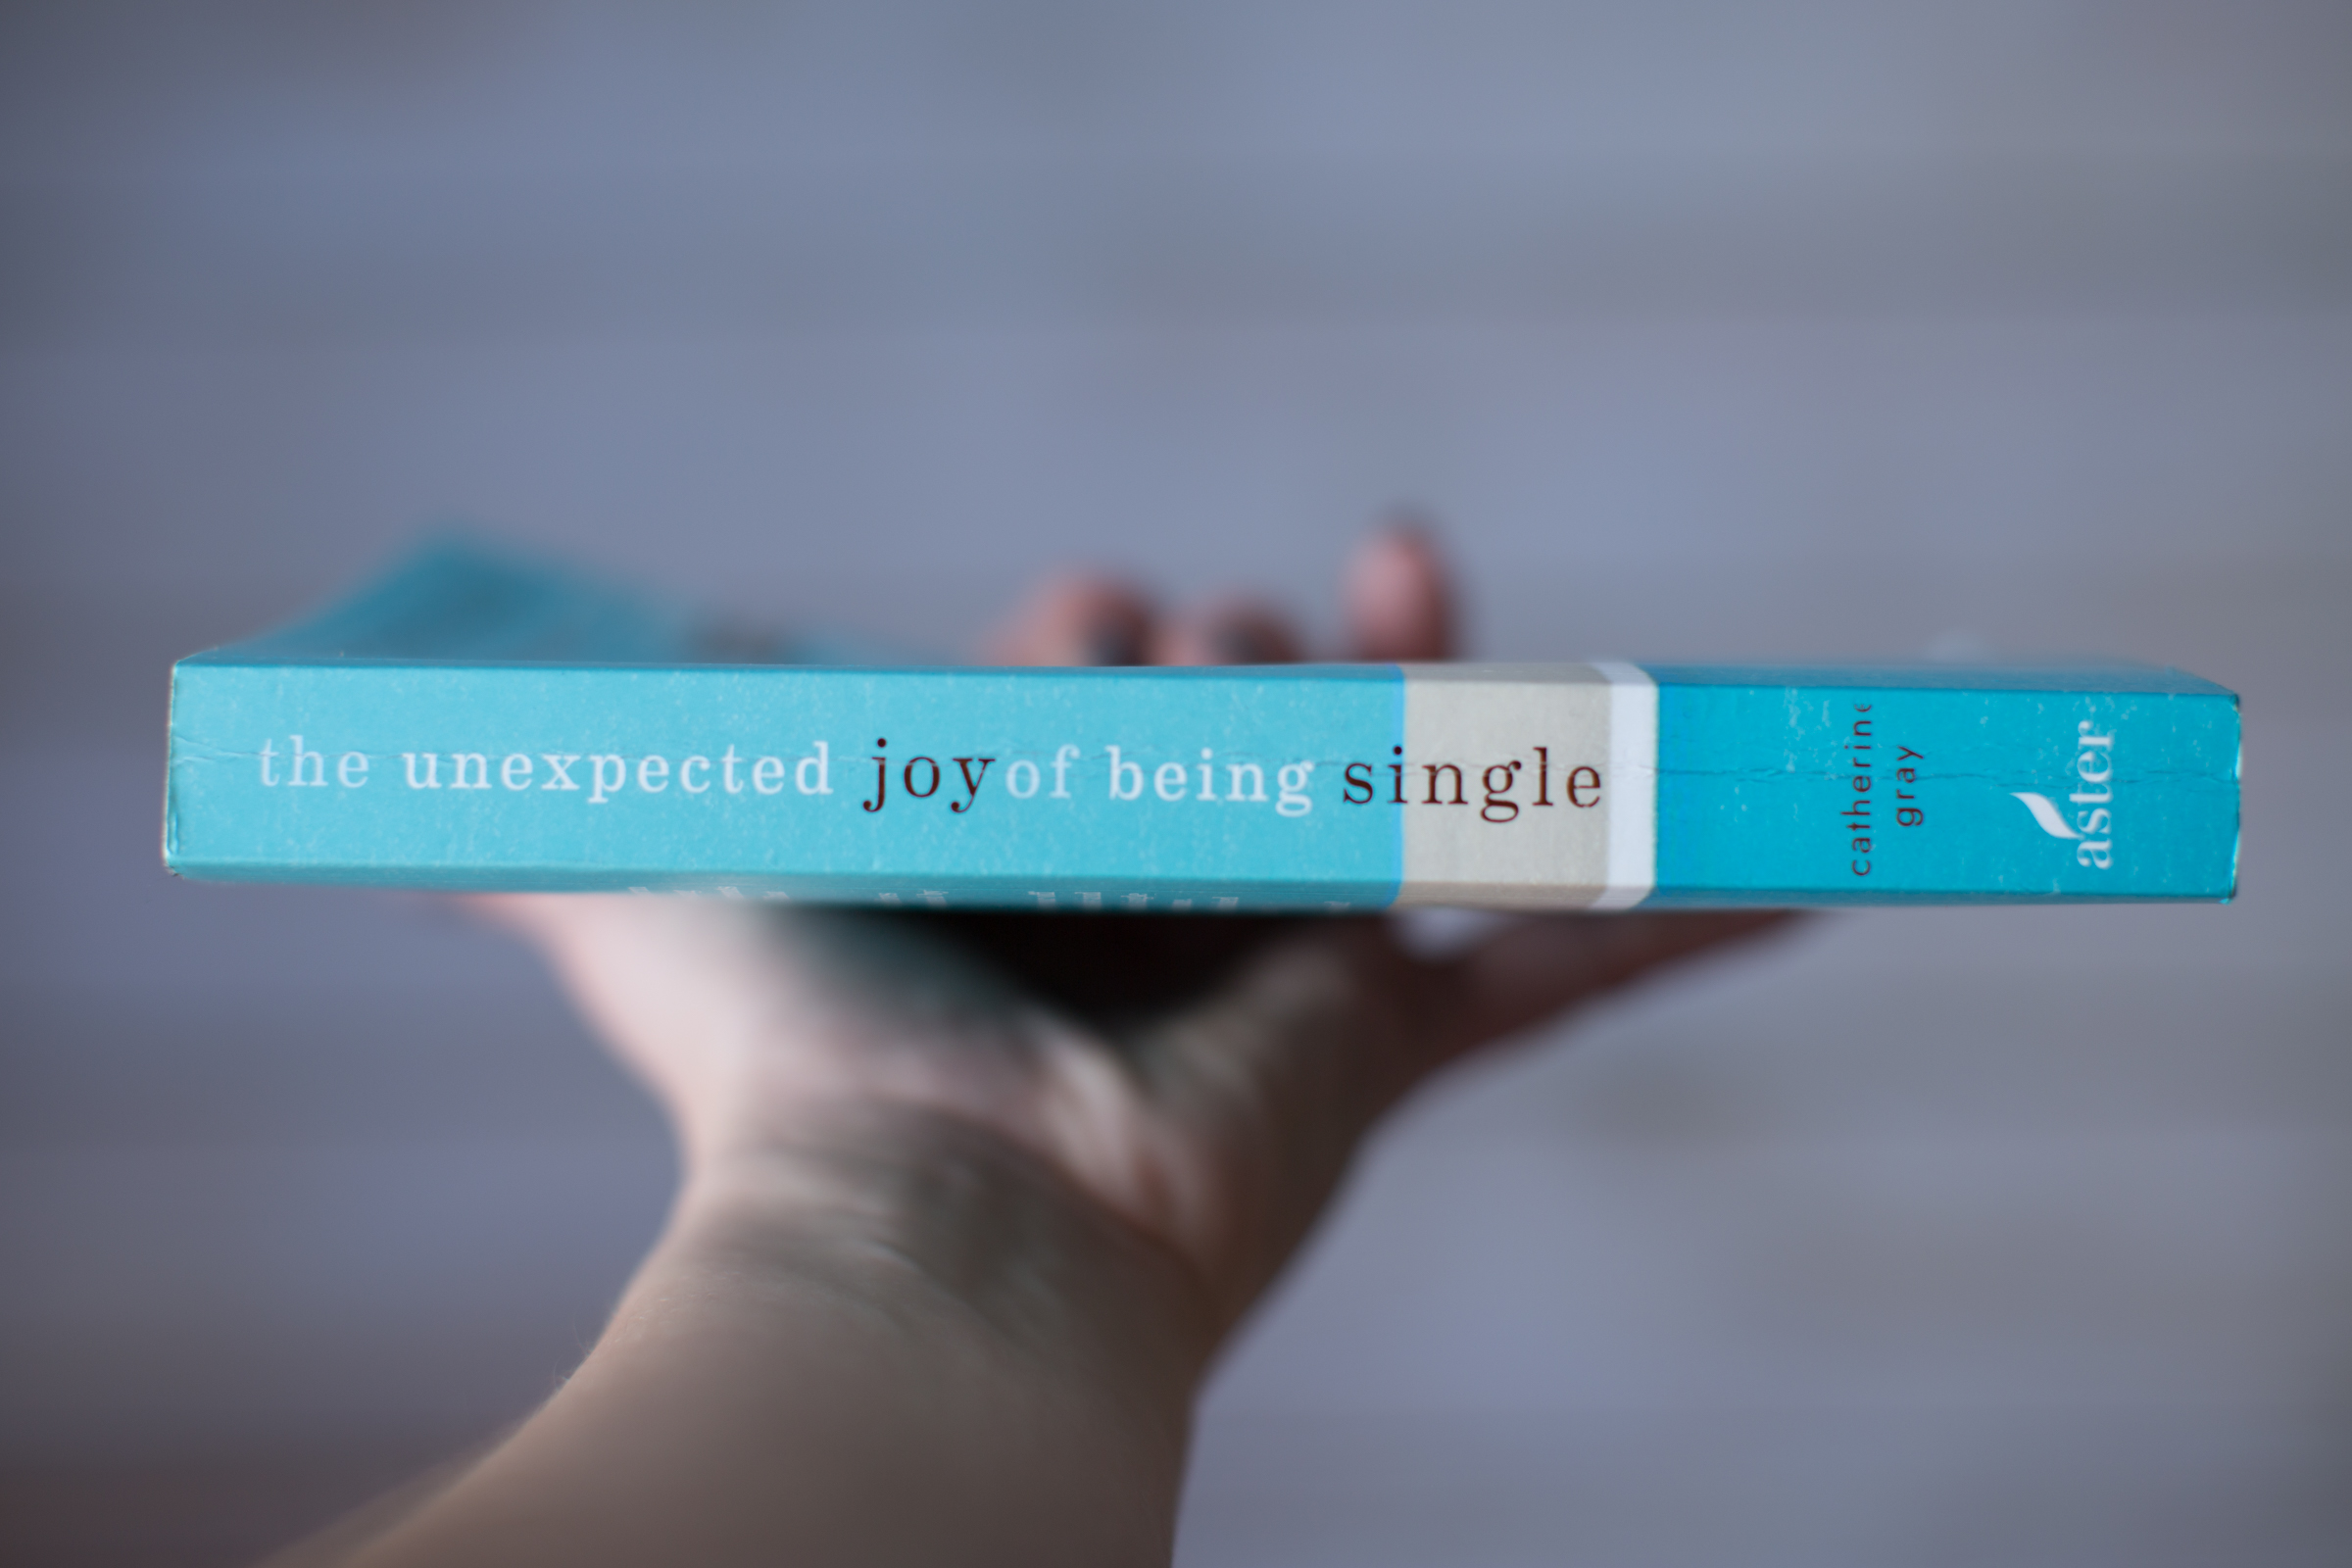 the-unexpected-joy-of-being-single-book-review-minas-planet5.jpg